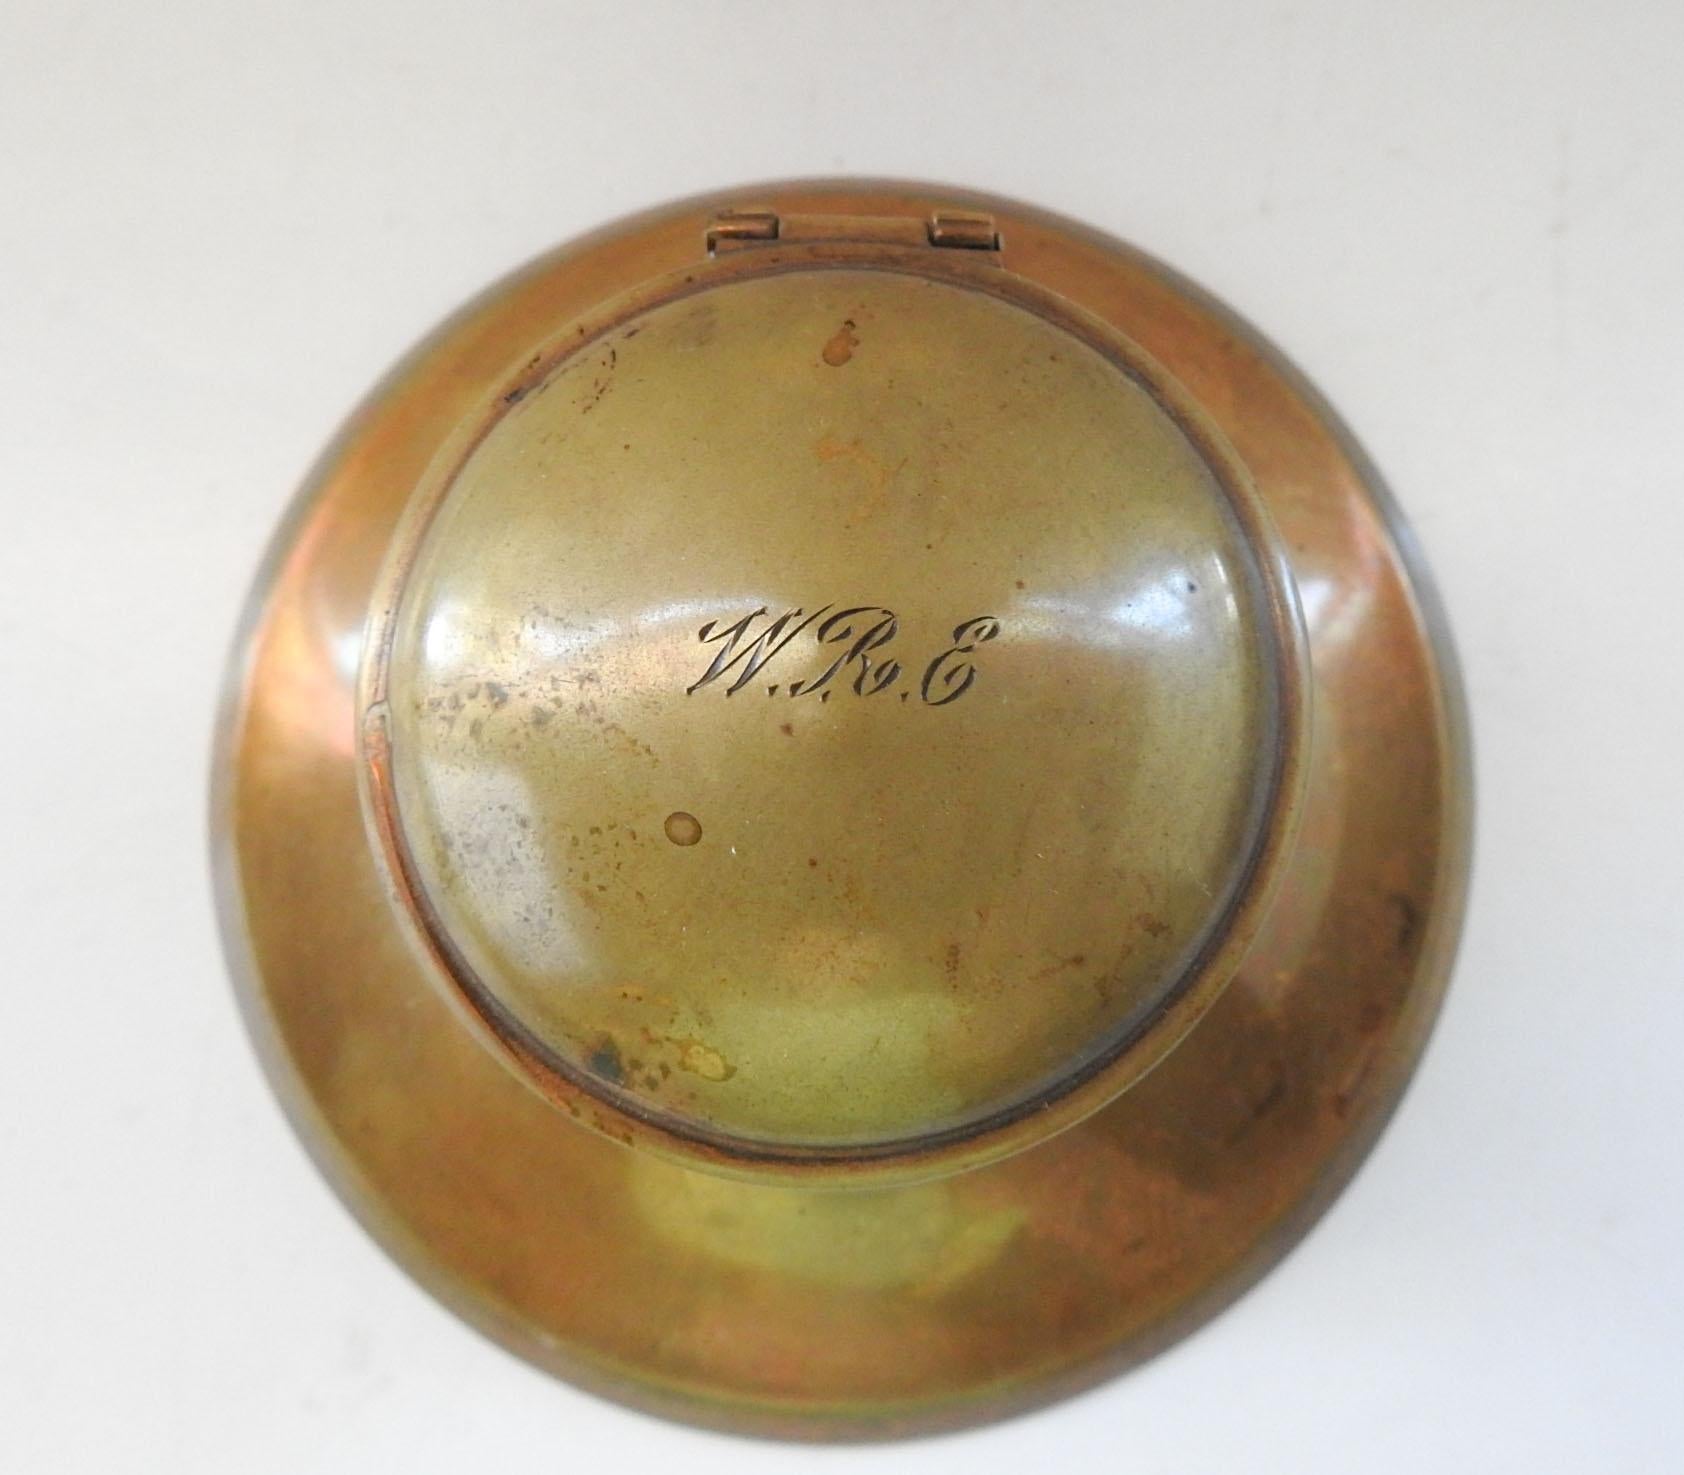 Circa 1890's brass inkwell with glass insert. Monogramed WRE on top, likely gilt finish at one time which has now worn off. Felt bottom, overall patina.